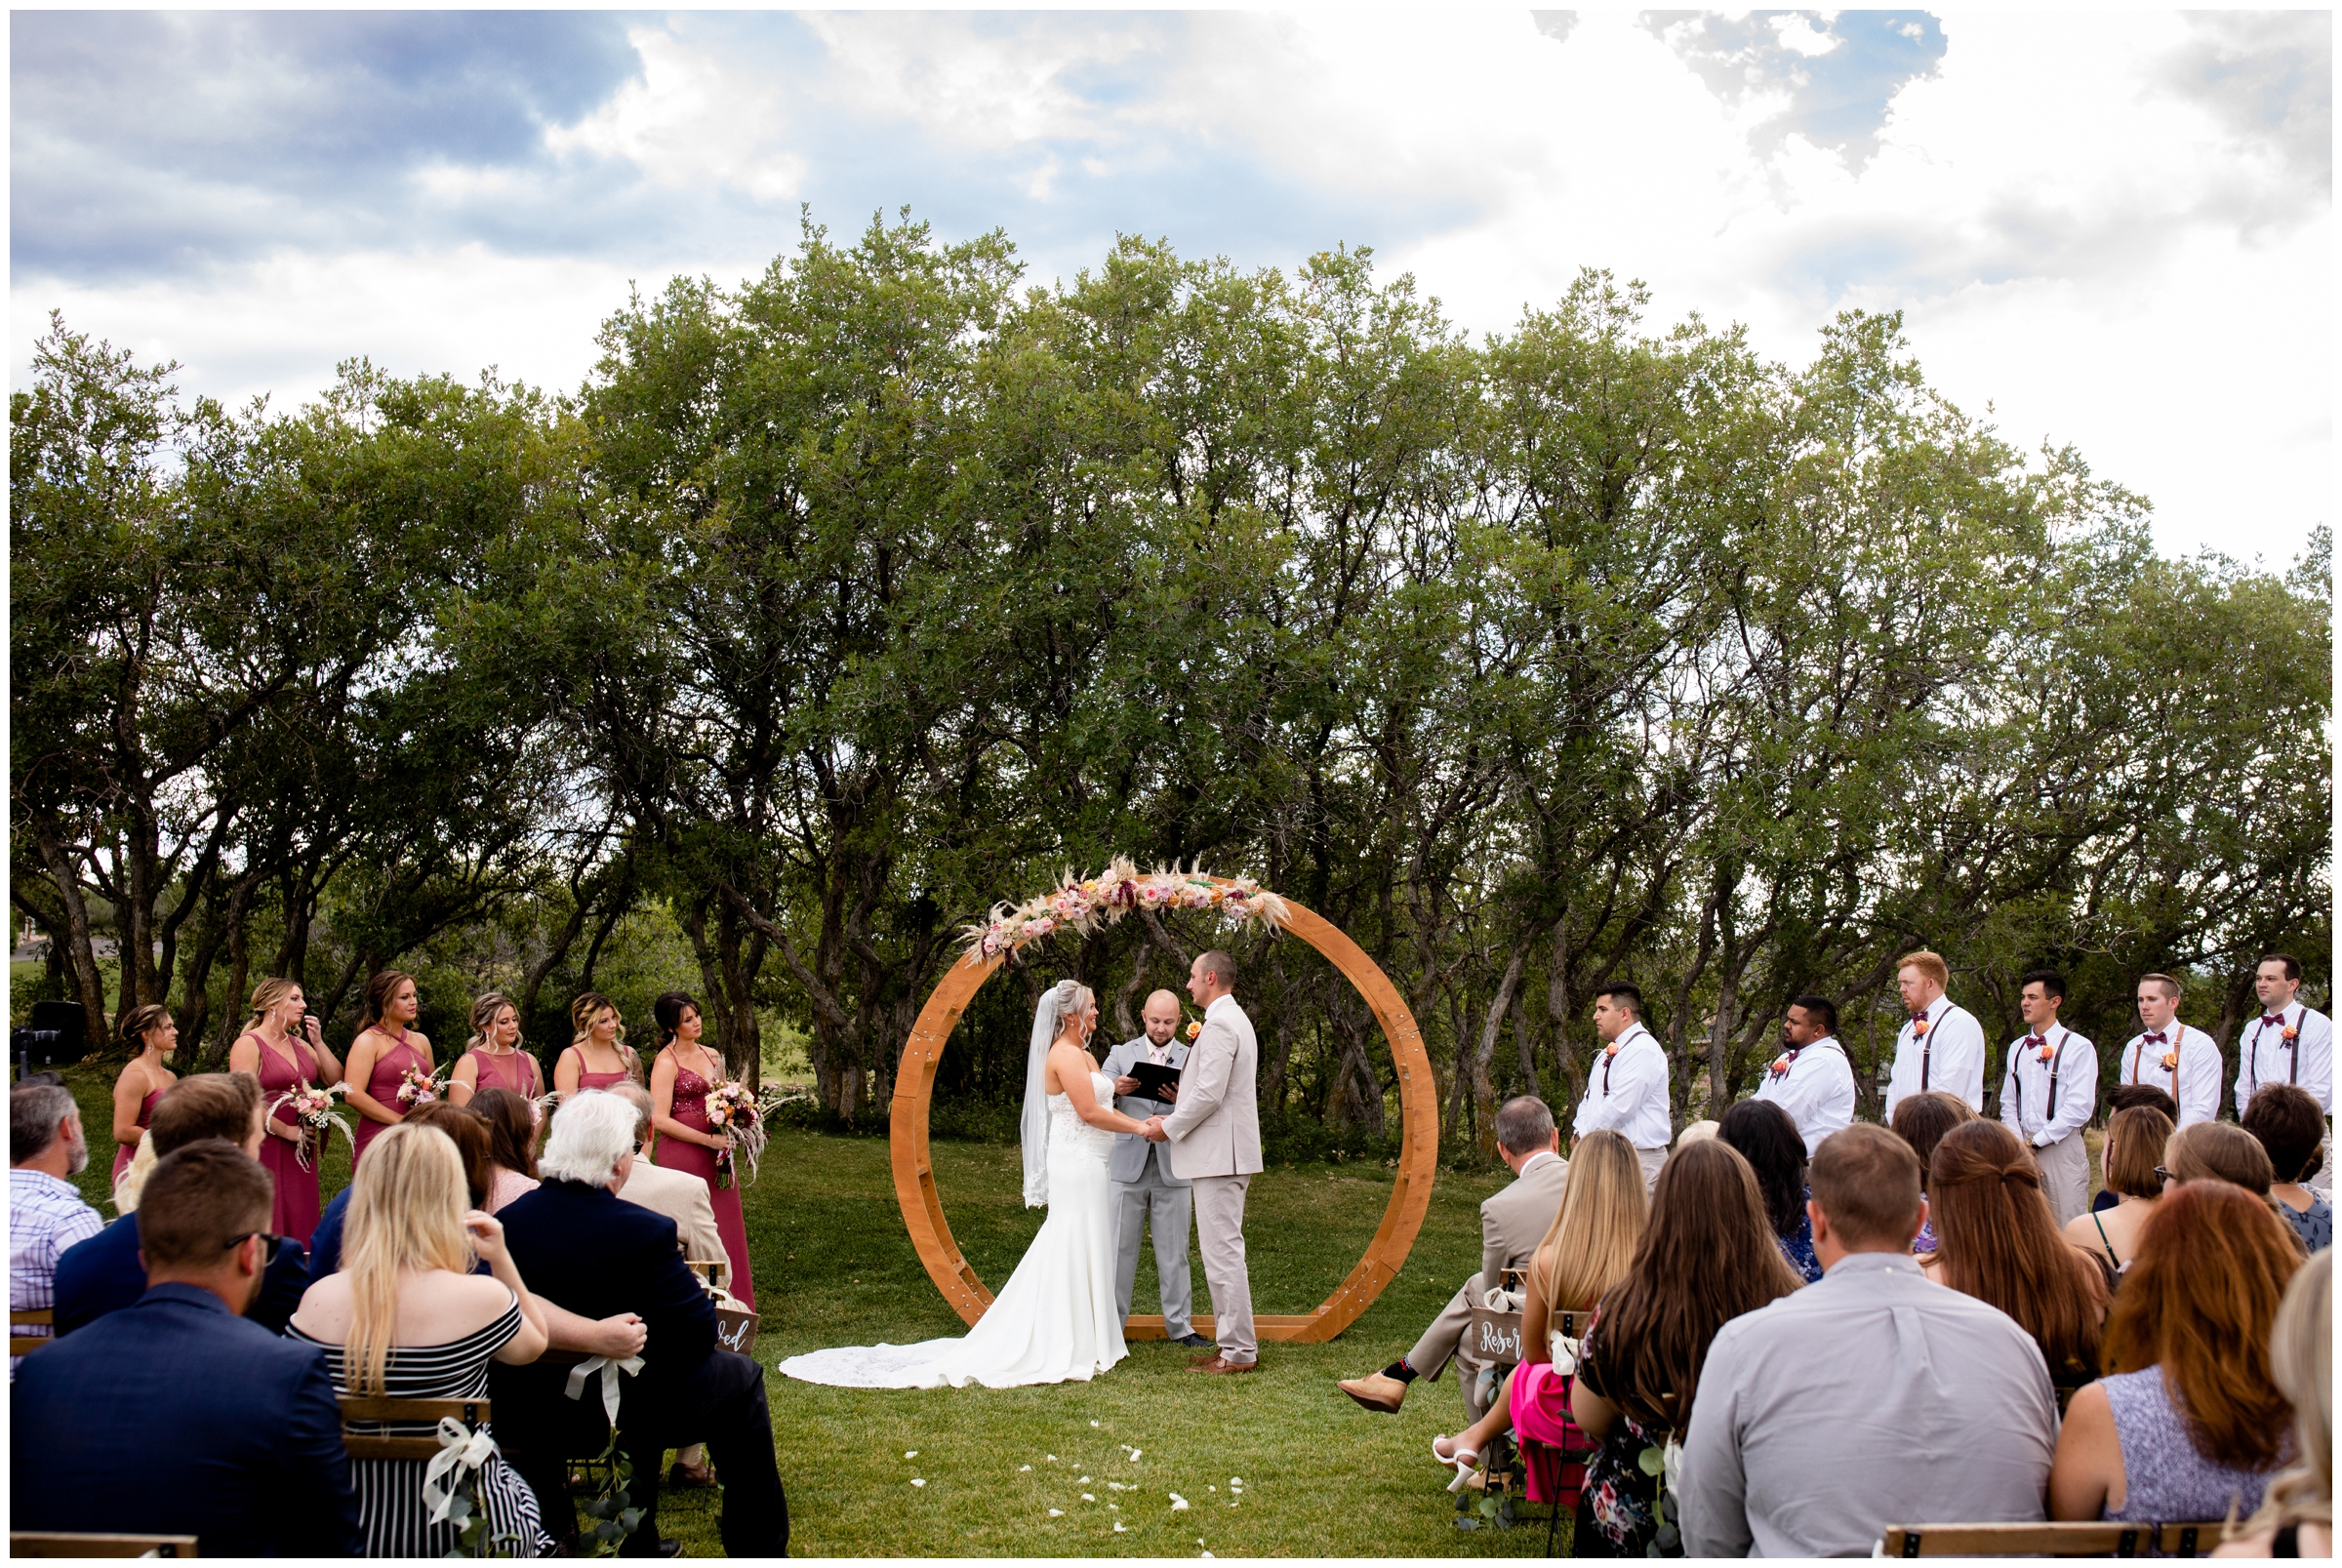 outdoor wedding ceremony inspiration at the Oaks at Plum Creek Colorado golf course 